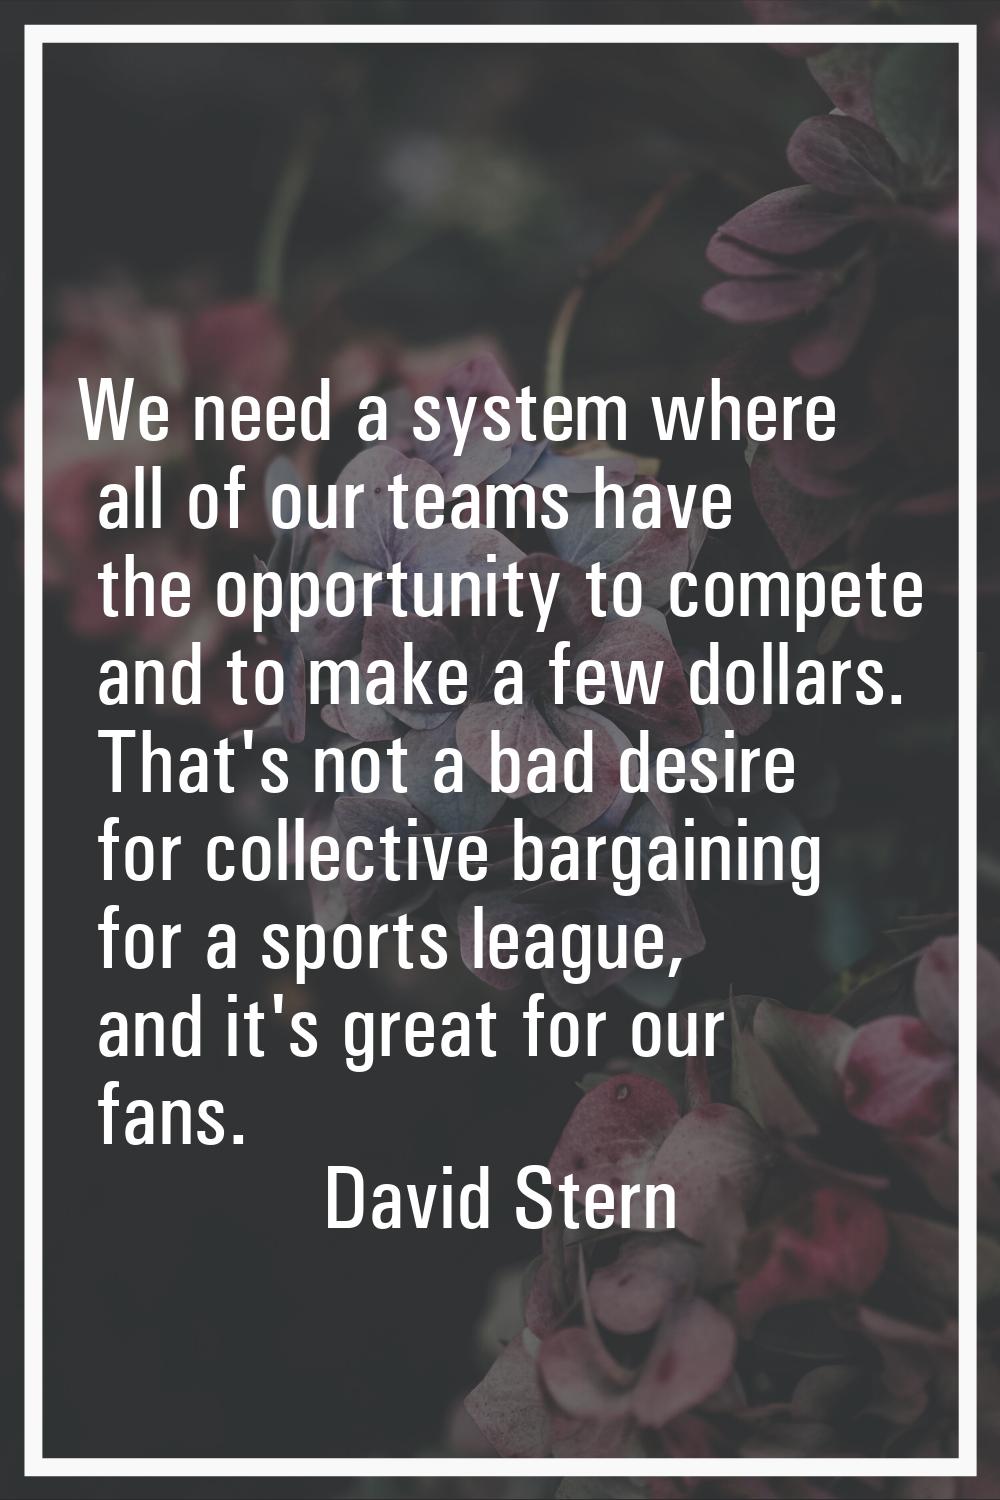 We need a system where all of our teams have the opportunity to compete and to make a few dollars. 